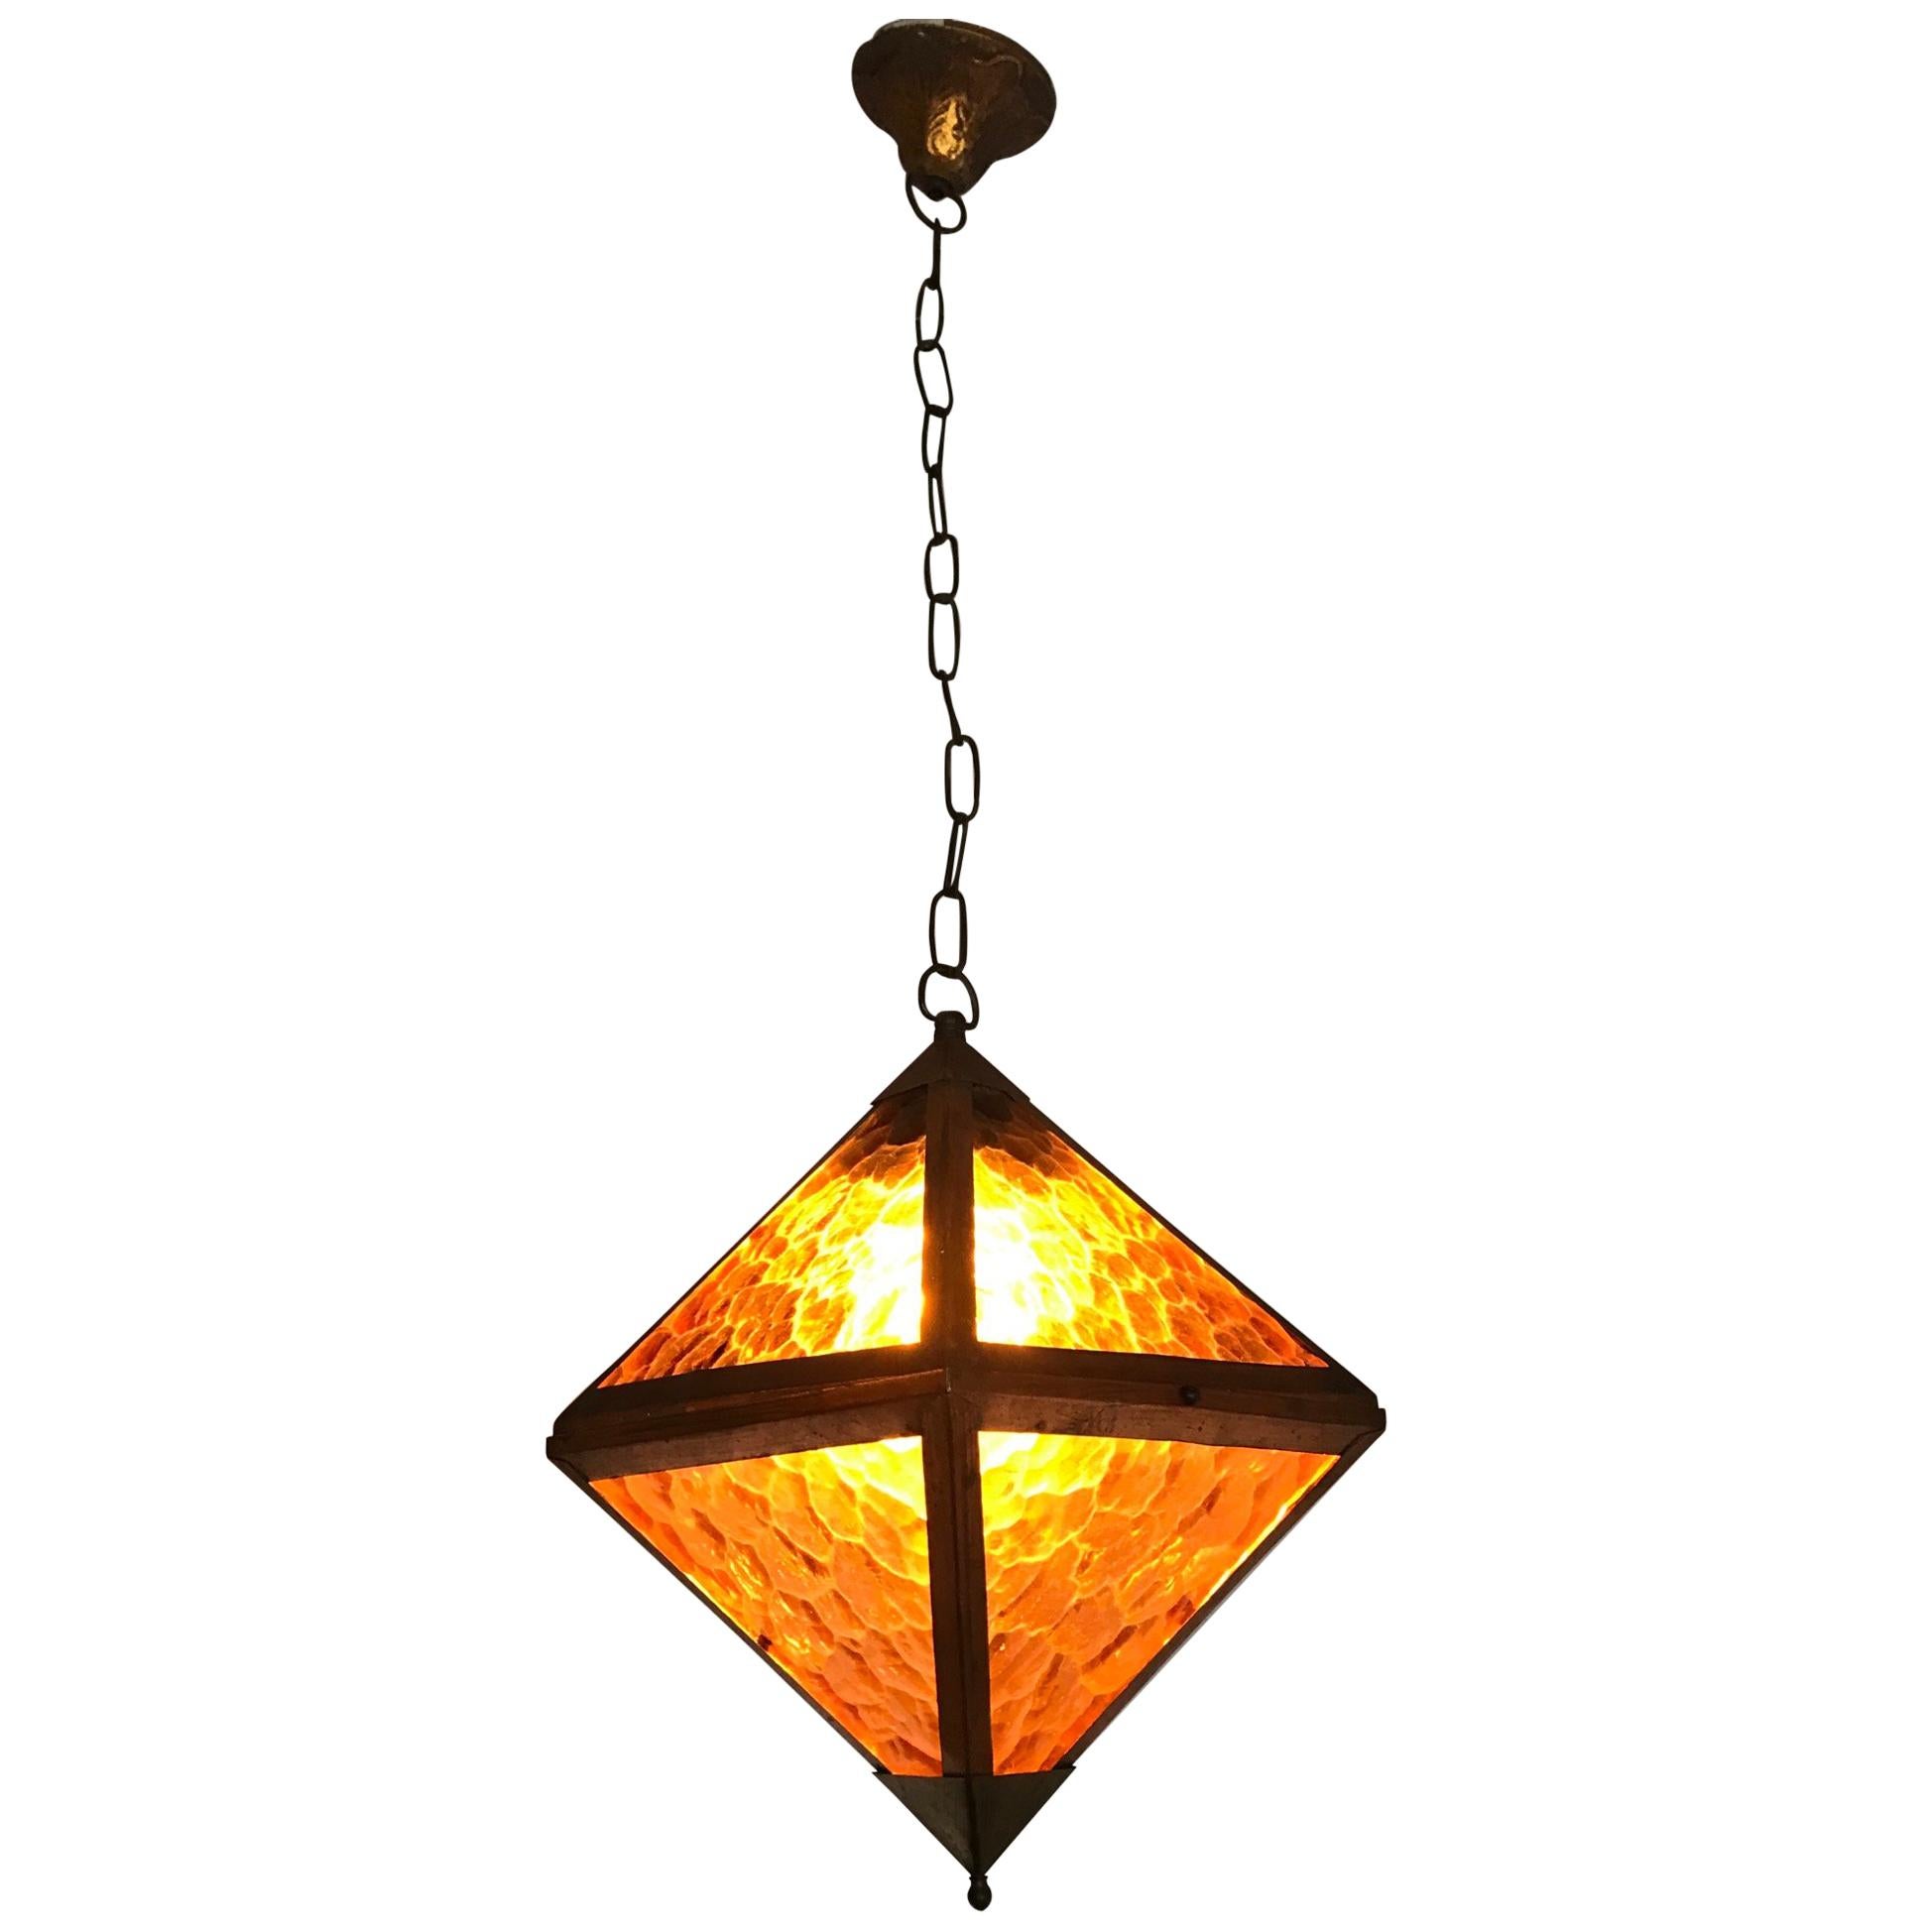 Early 20th Century Arts & Crafts Copper and Glass Cube Shape Pendant Light Lamp